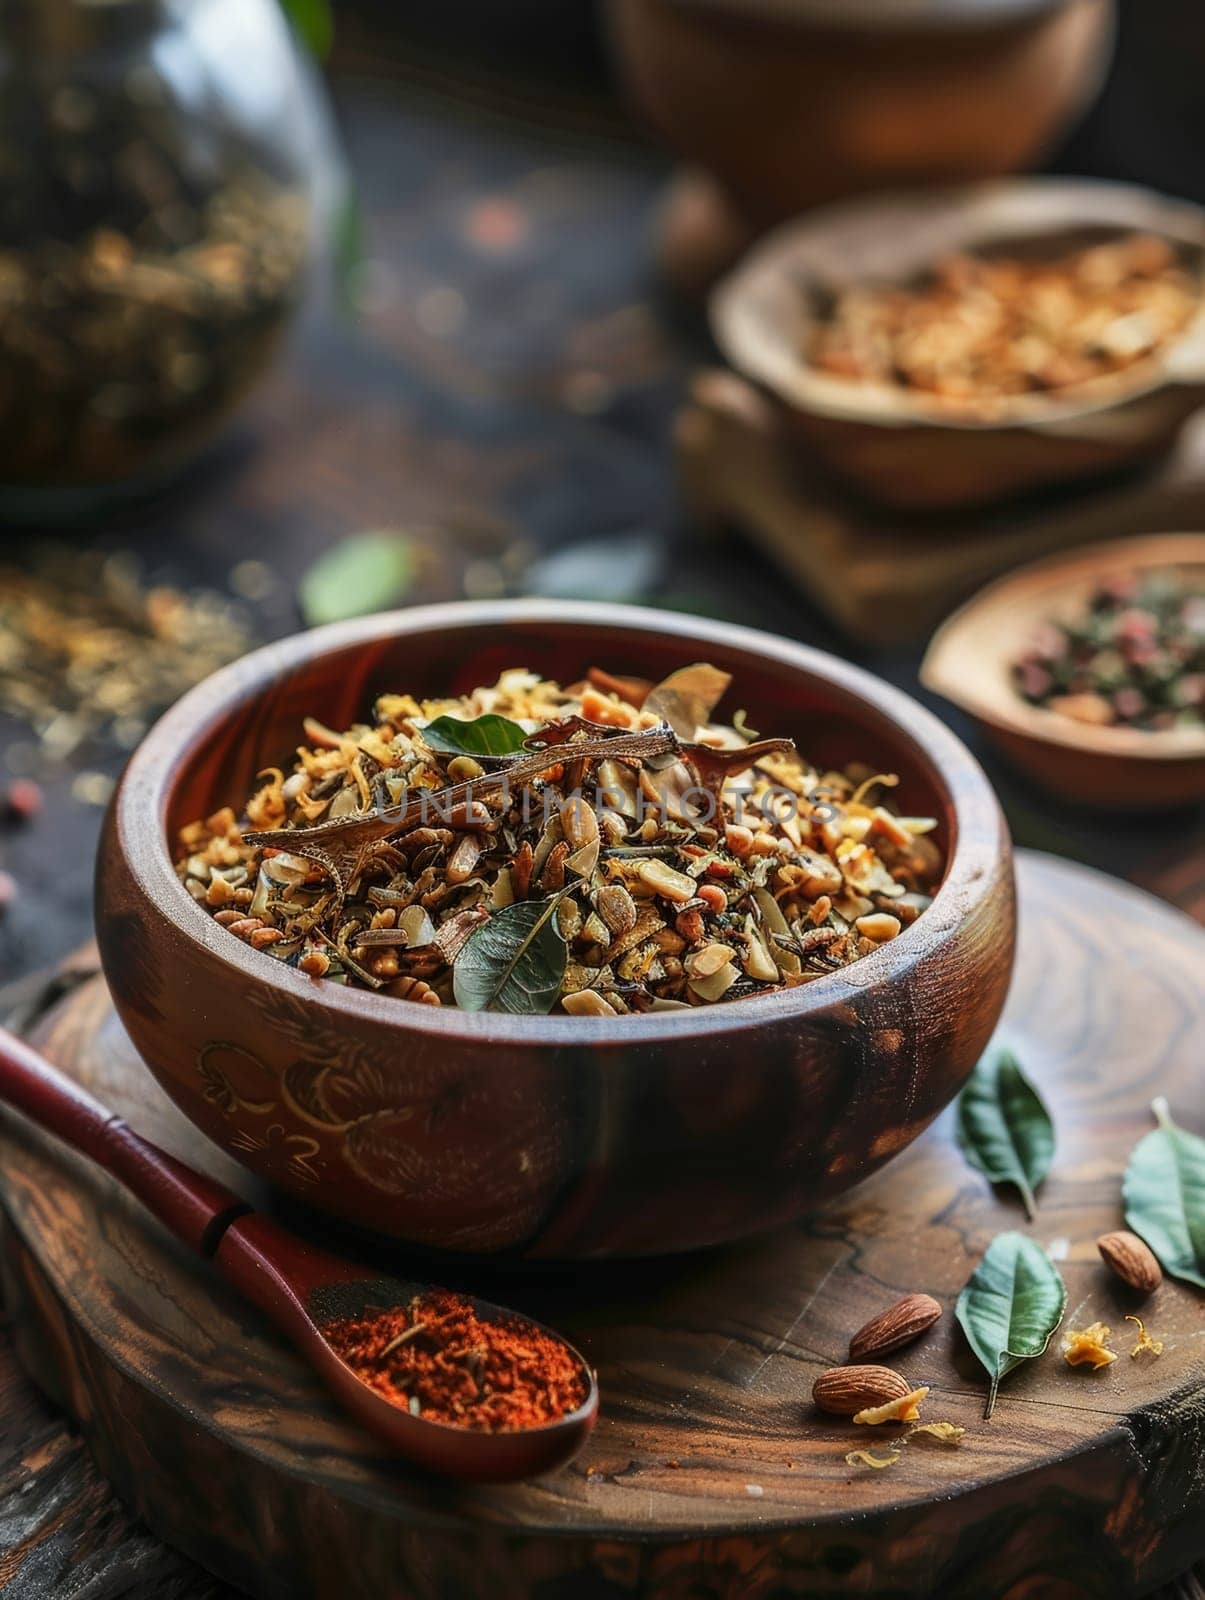 Burmese lahpet thoke or tea leaf salad, made with fermented tea leaves, crunchy nuts, seeds, and other fresh ingredients, served in an authentic wooden bowl